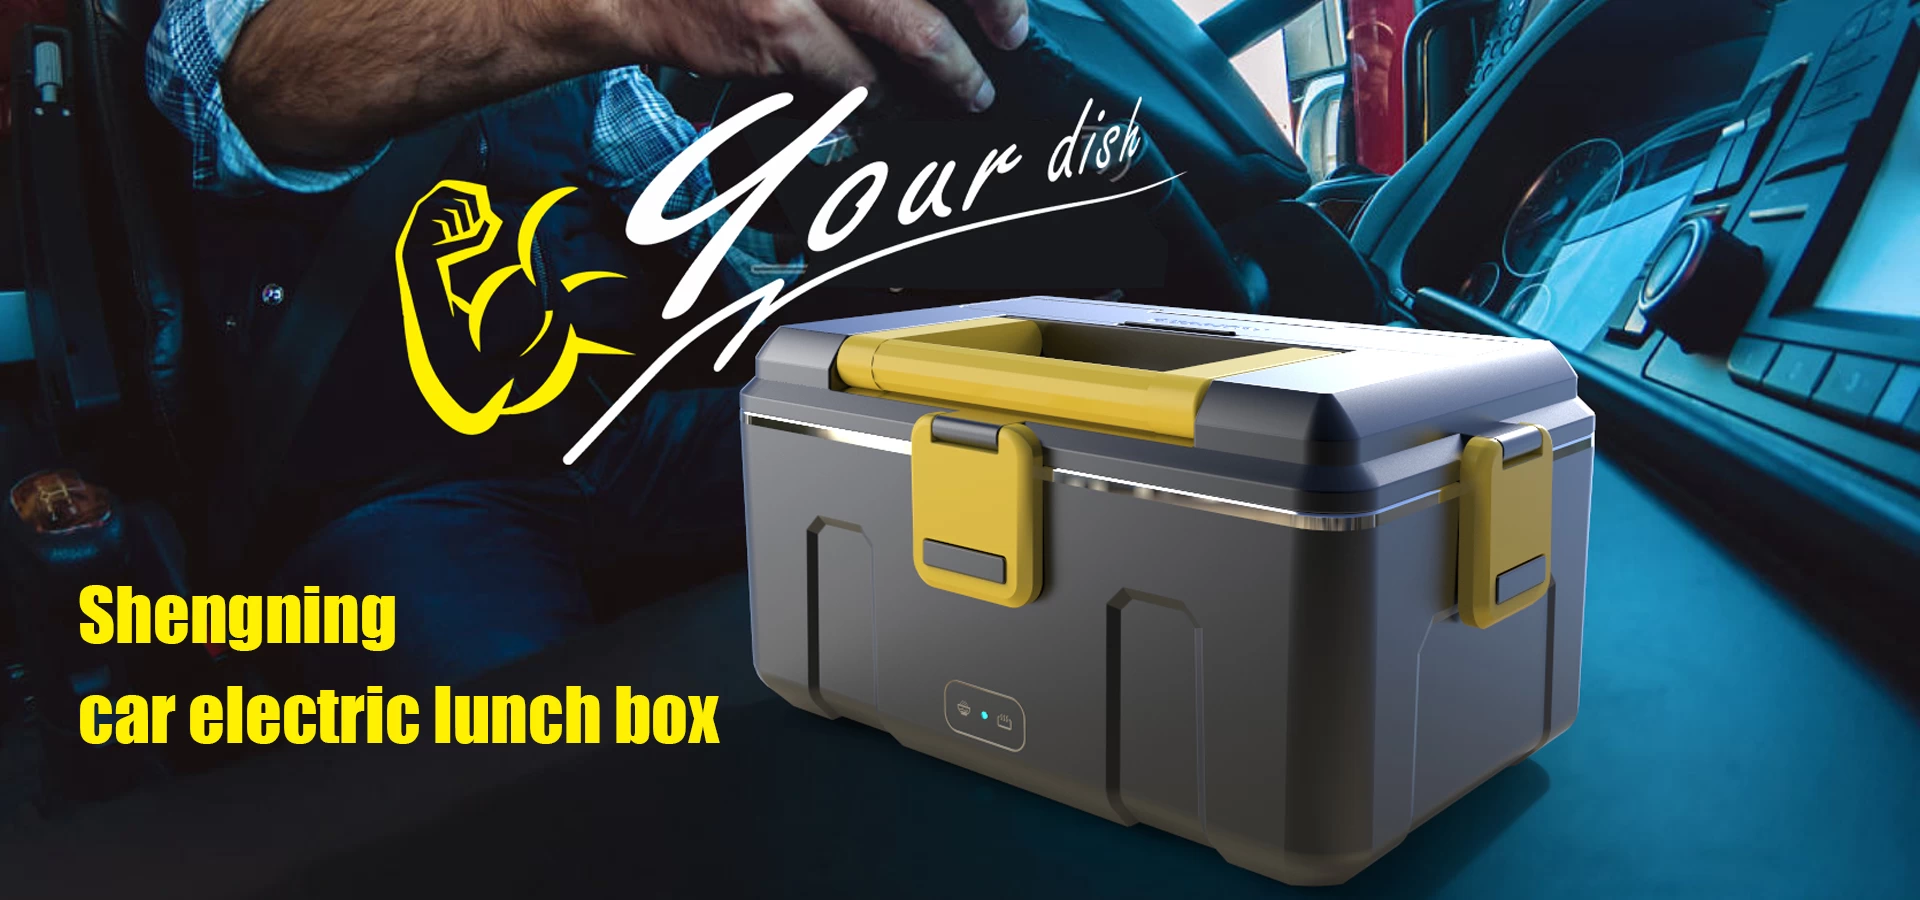 Shengning car electric lunch box